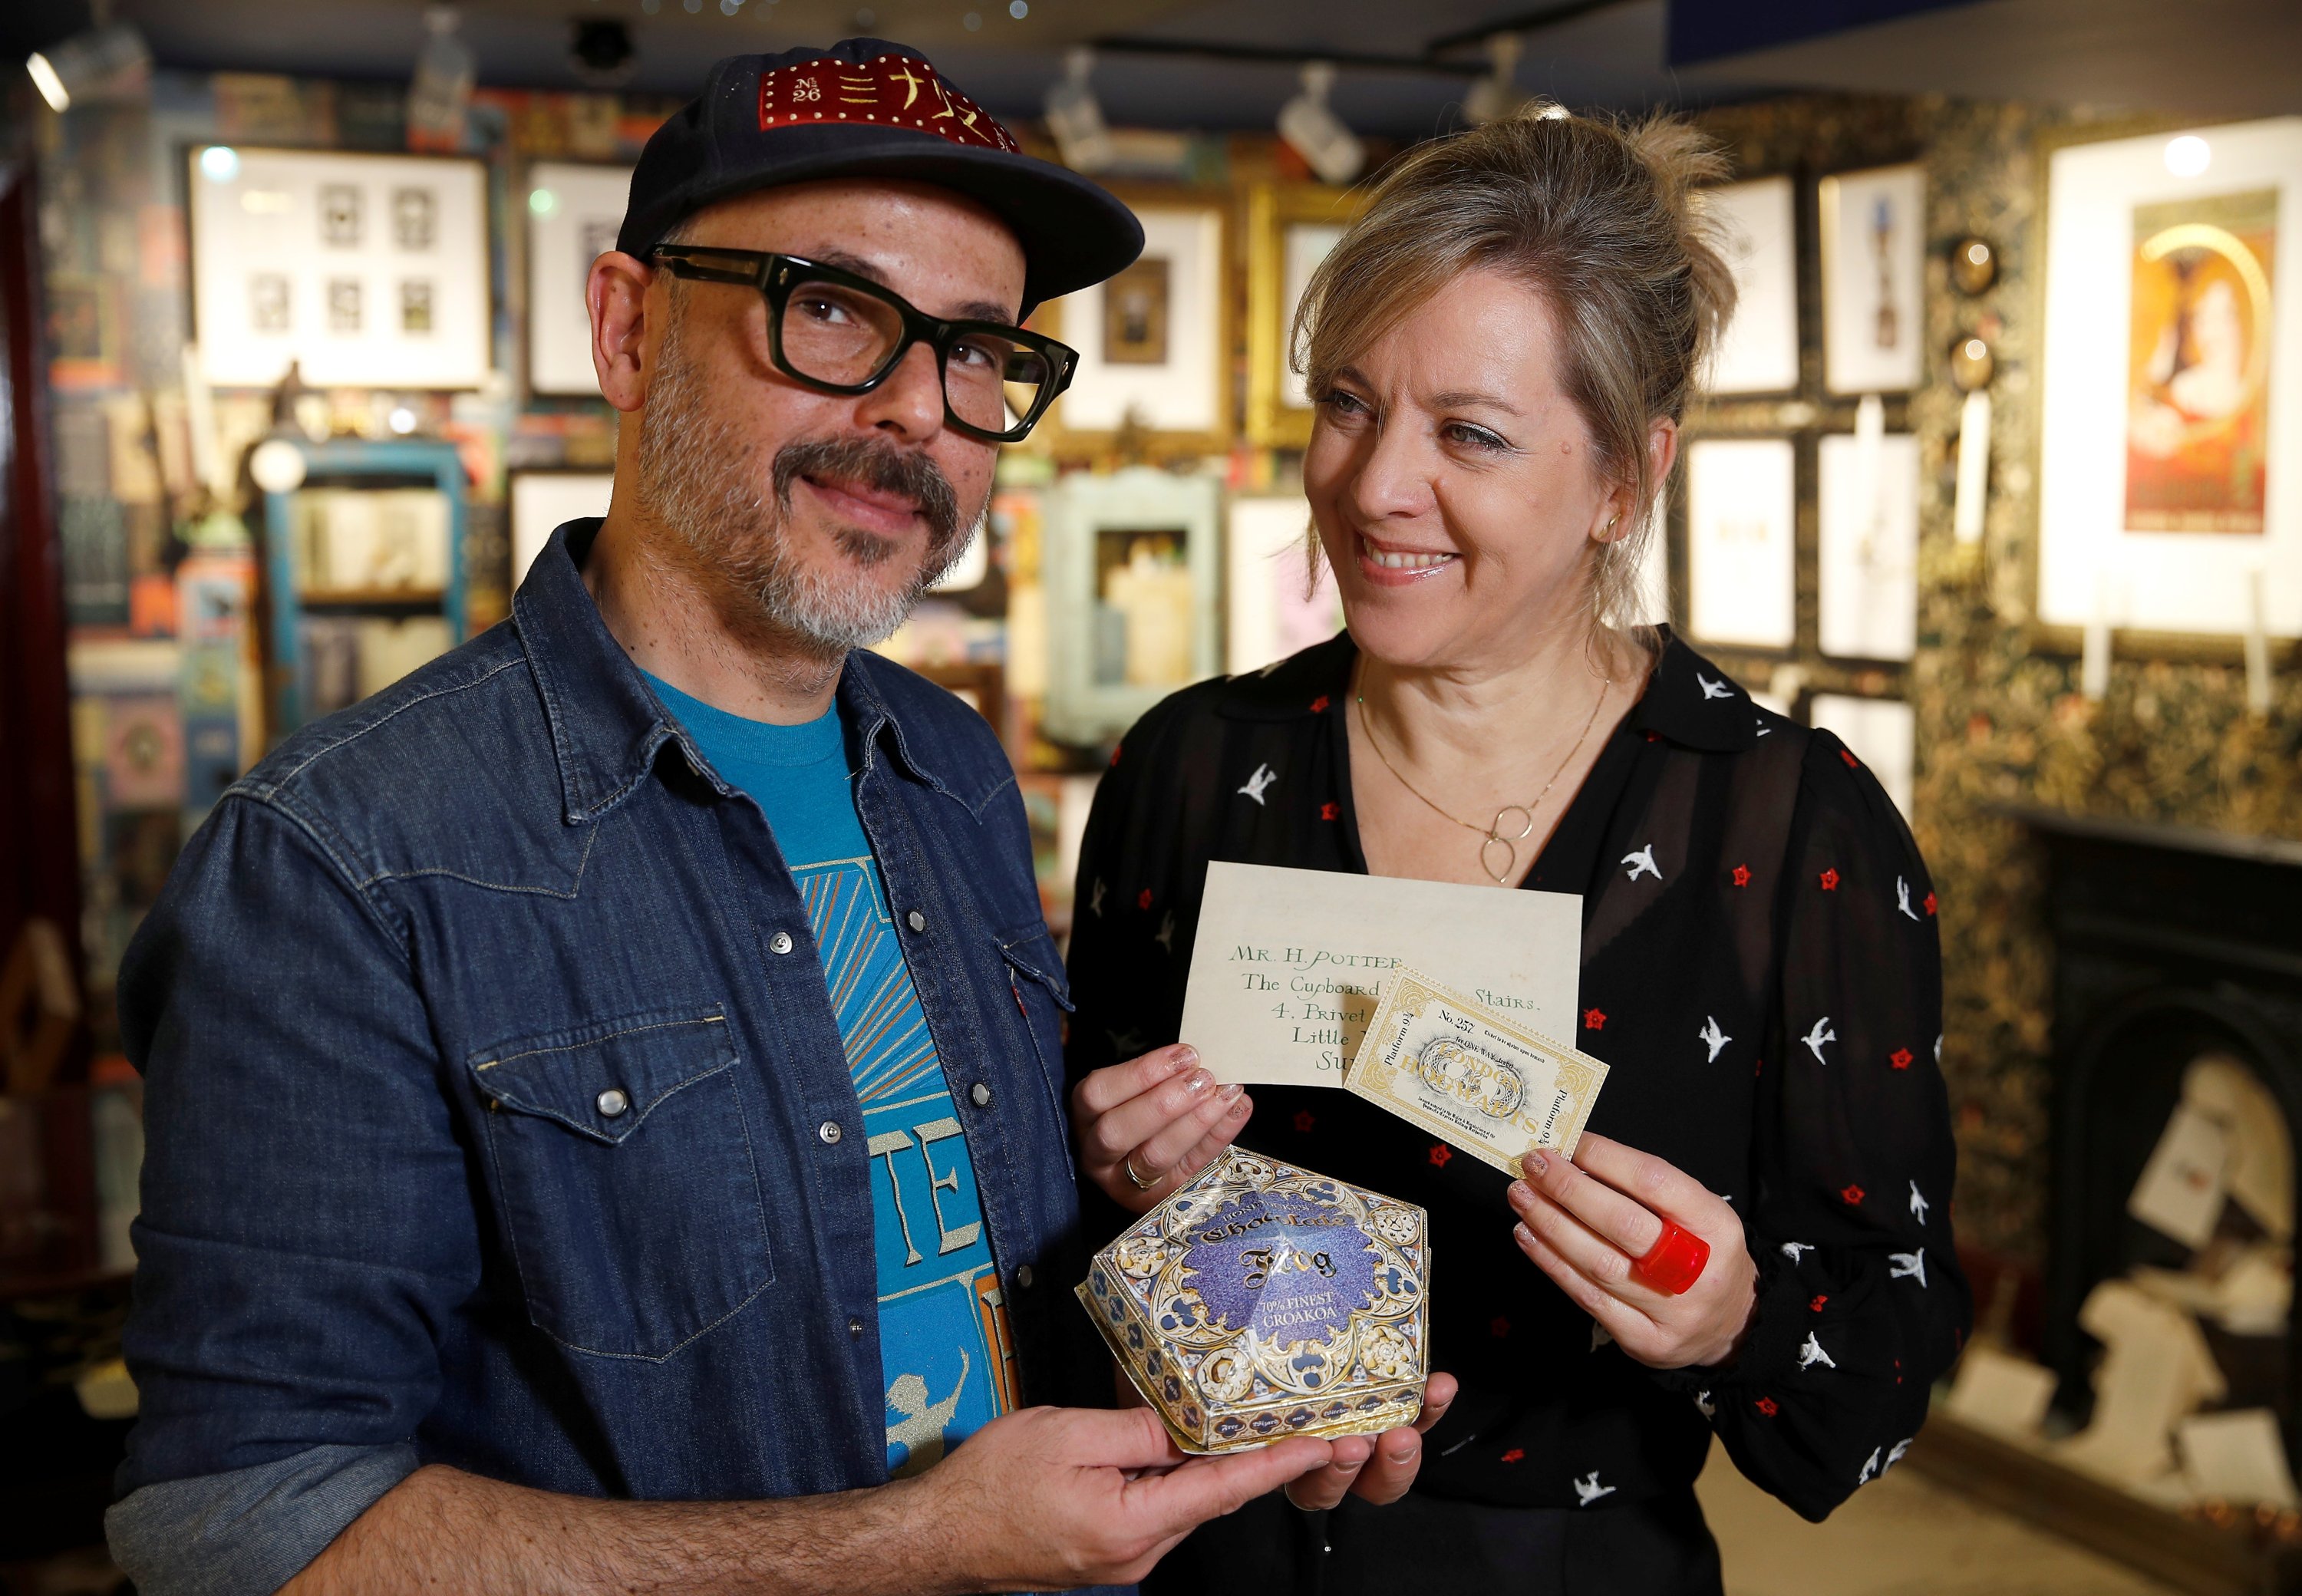 Artists Eduardo Lima and Miraphora Mina who created the graphic style of the Harry Potter movies, hold actual props they made for the movie, 'Harry Potter and the Philosopher's Stone,' at their store in London, Britain, Nov. 9, 2021. (REUTERS Photo)